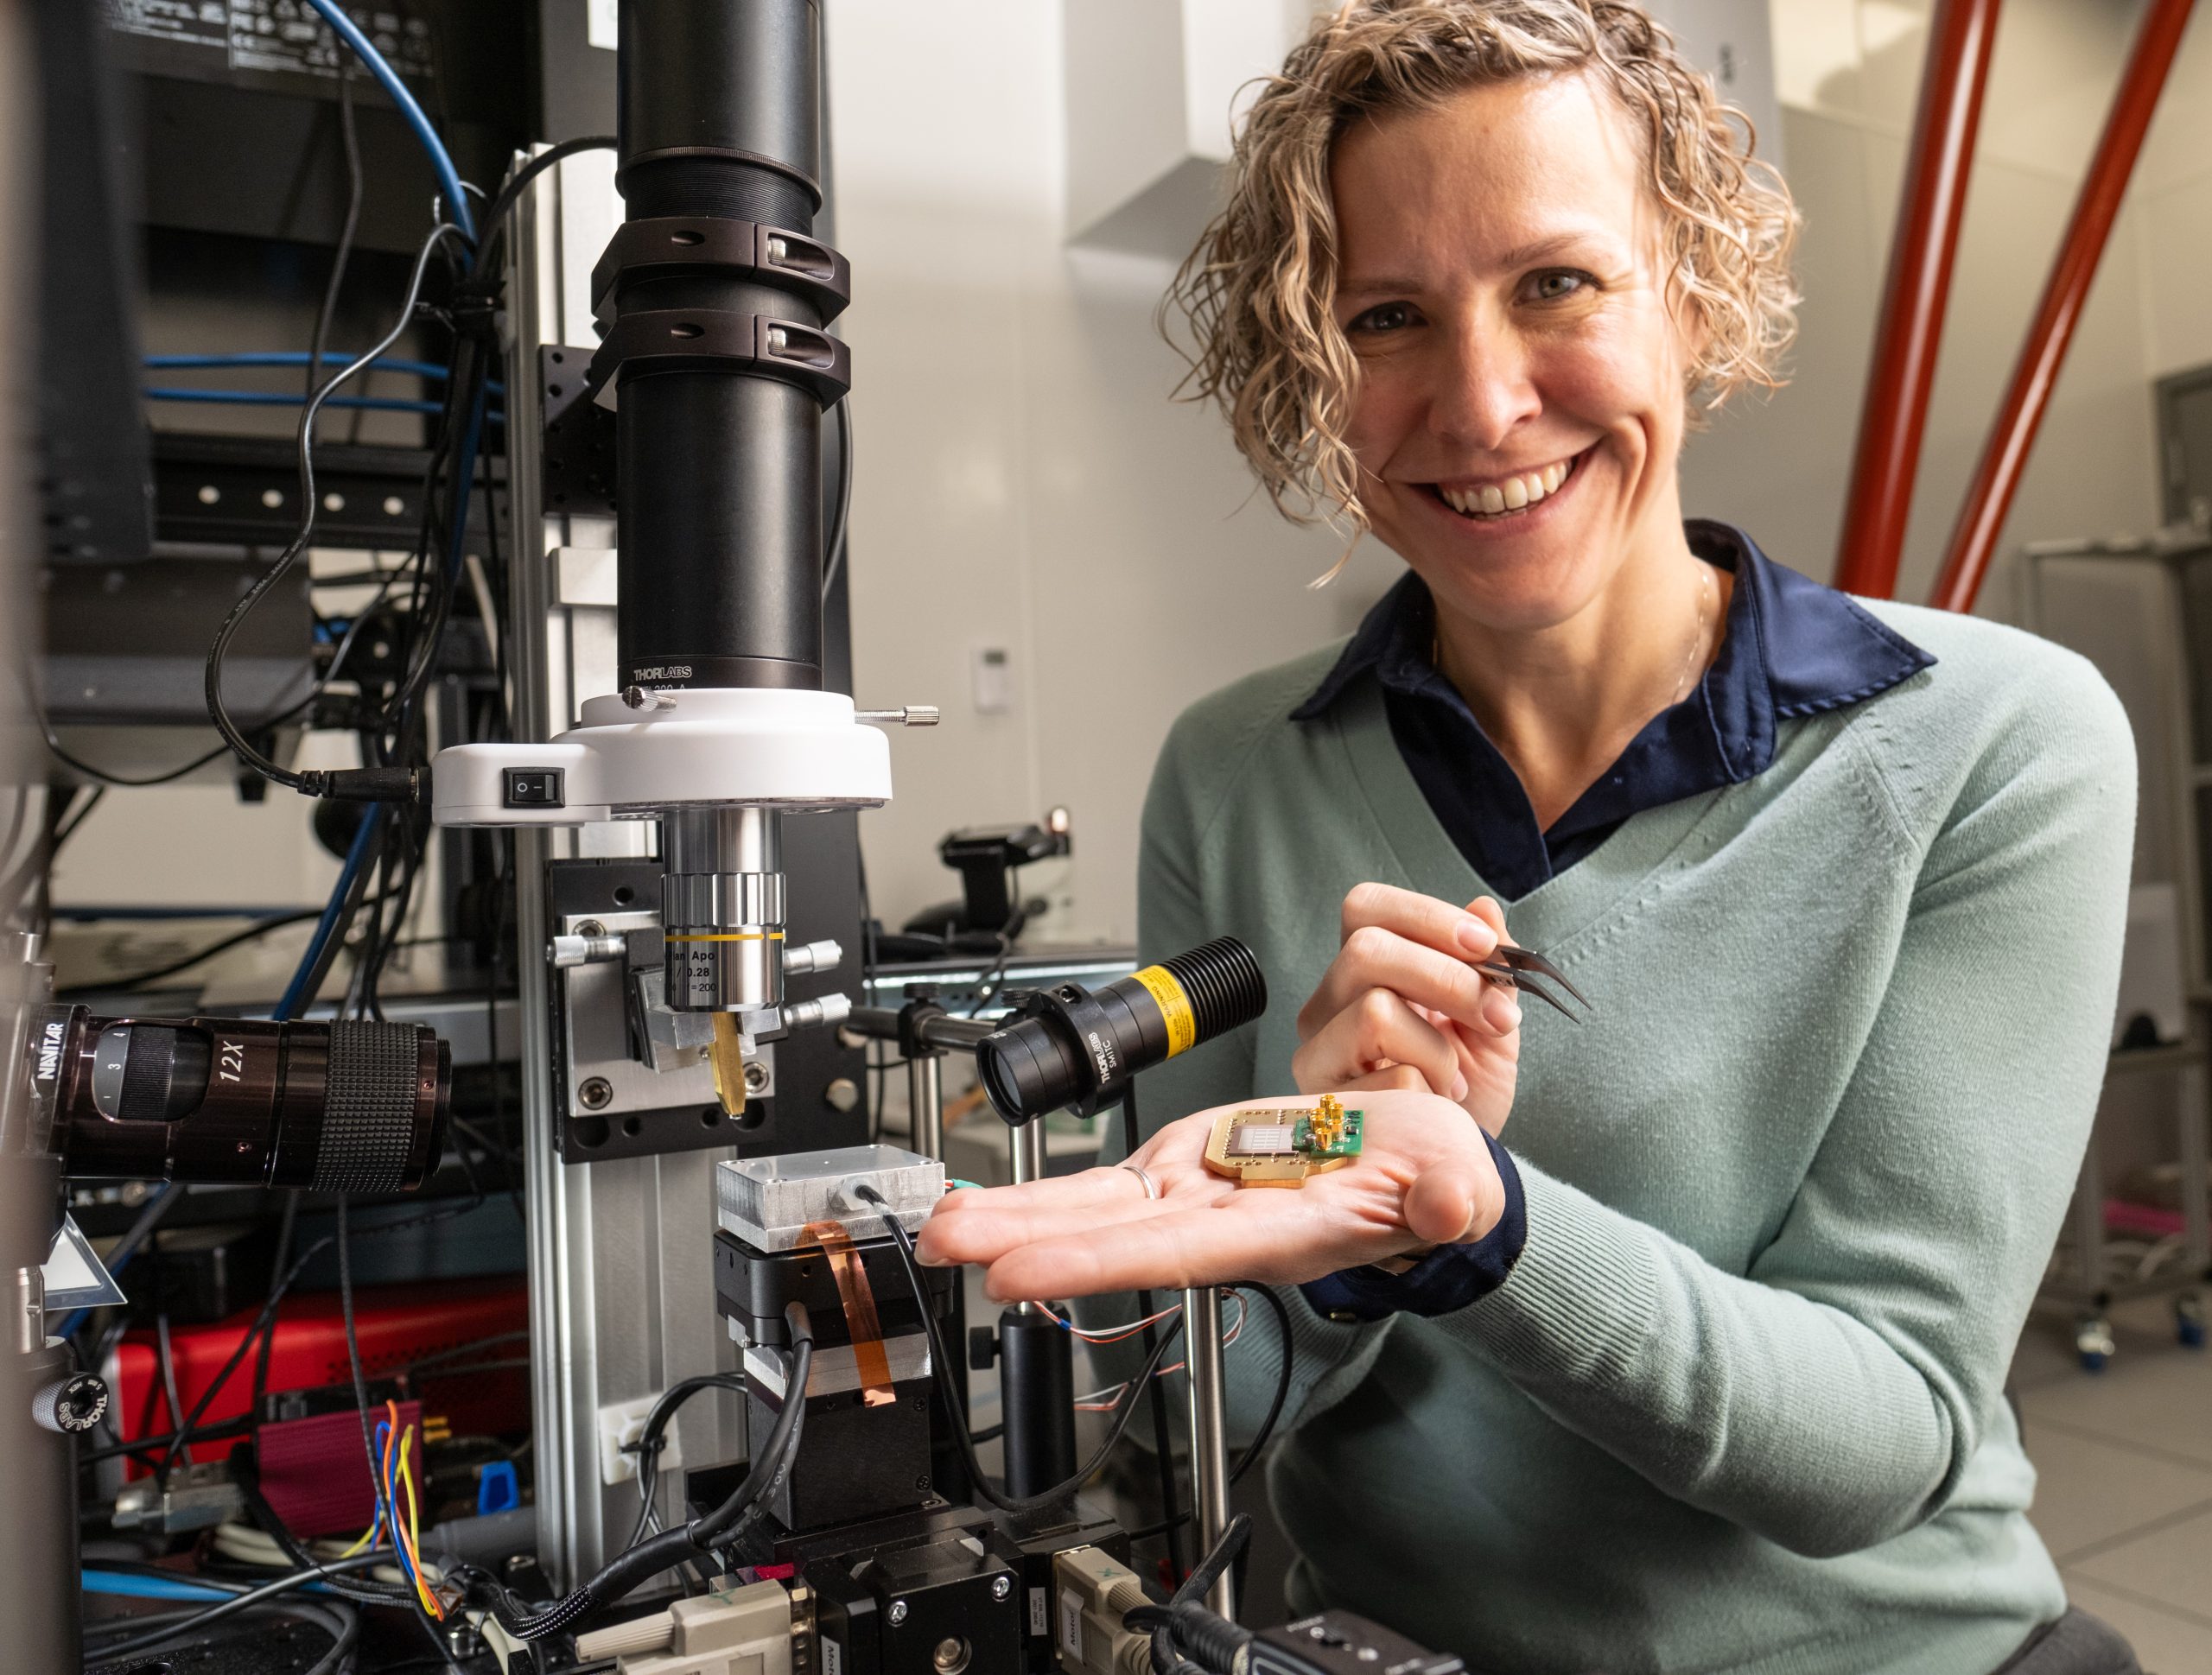 Microsoft And Photonic Inc. Join Forces On The Path To Quantum Computing At Scale.